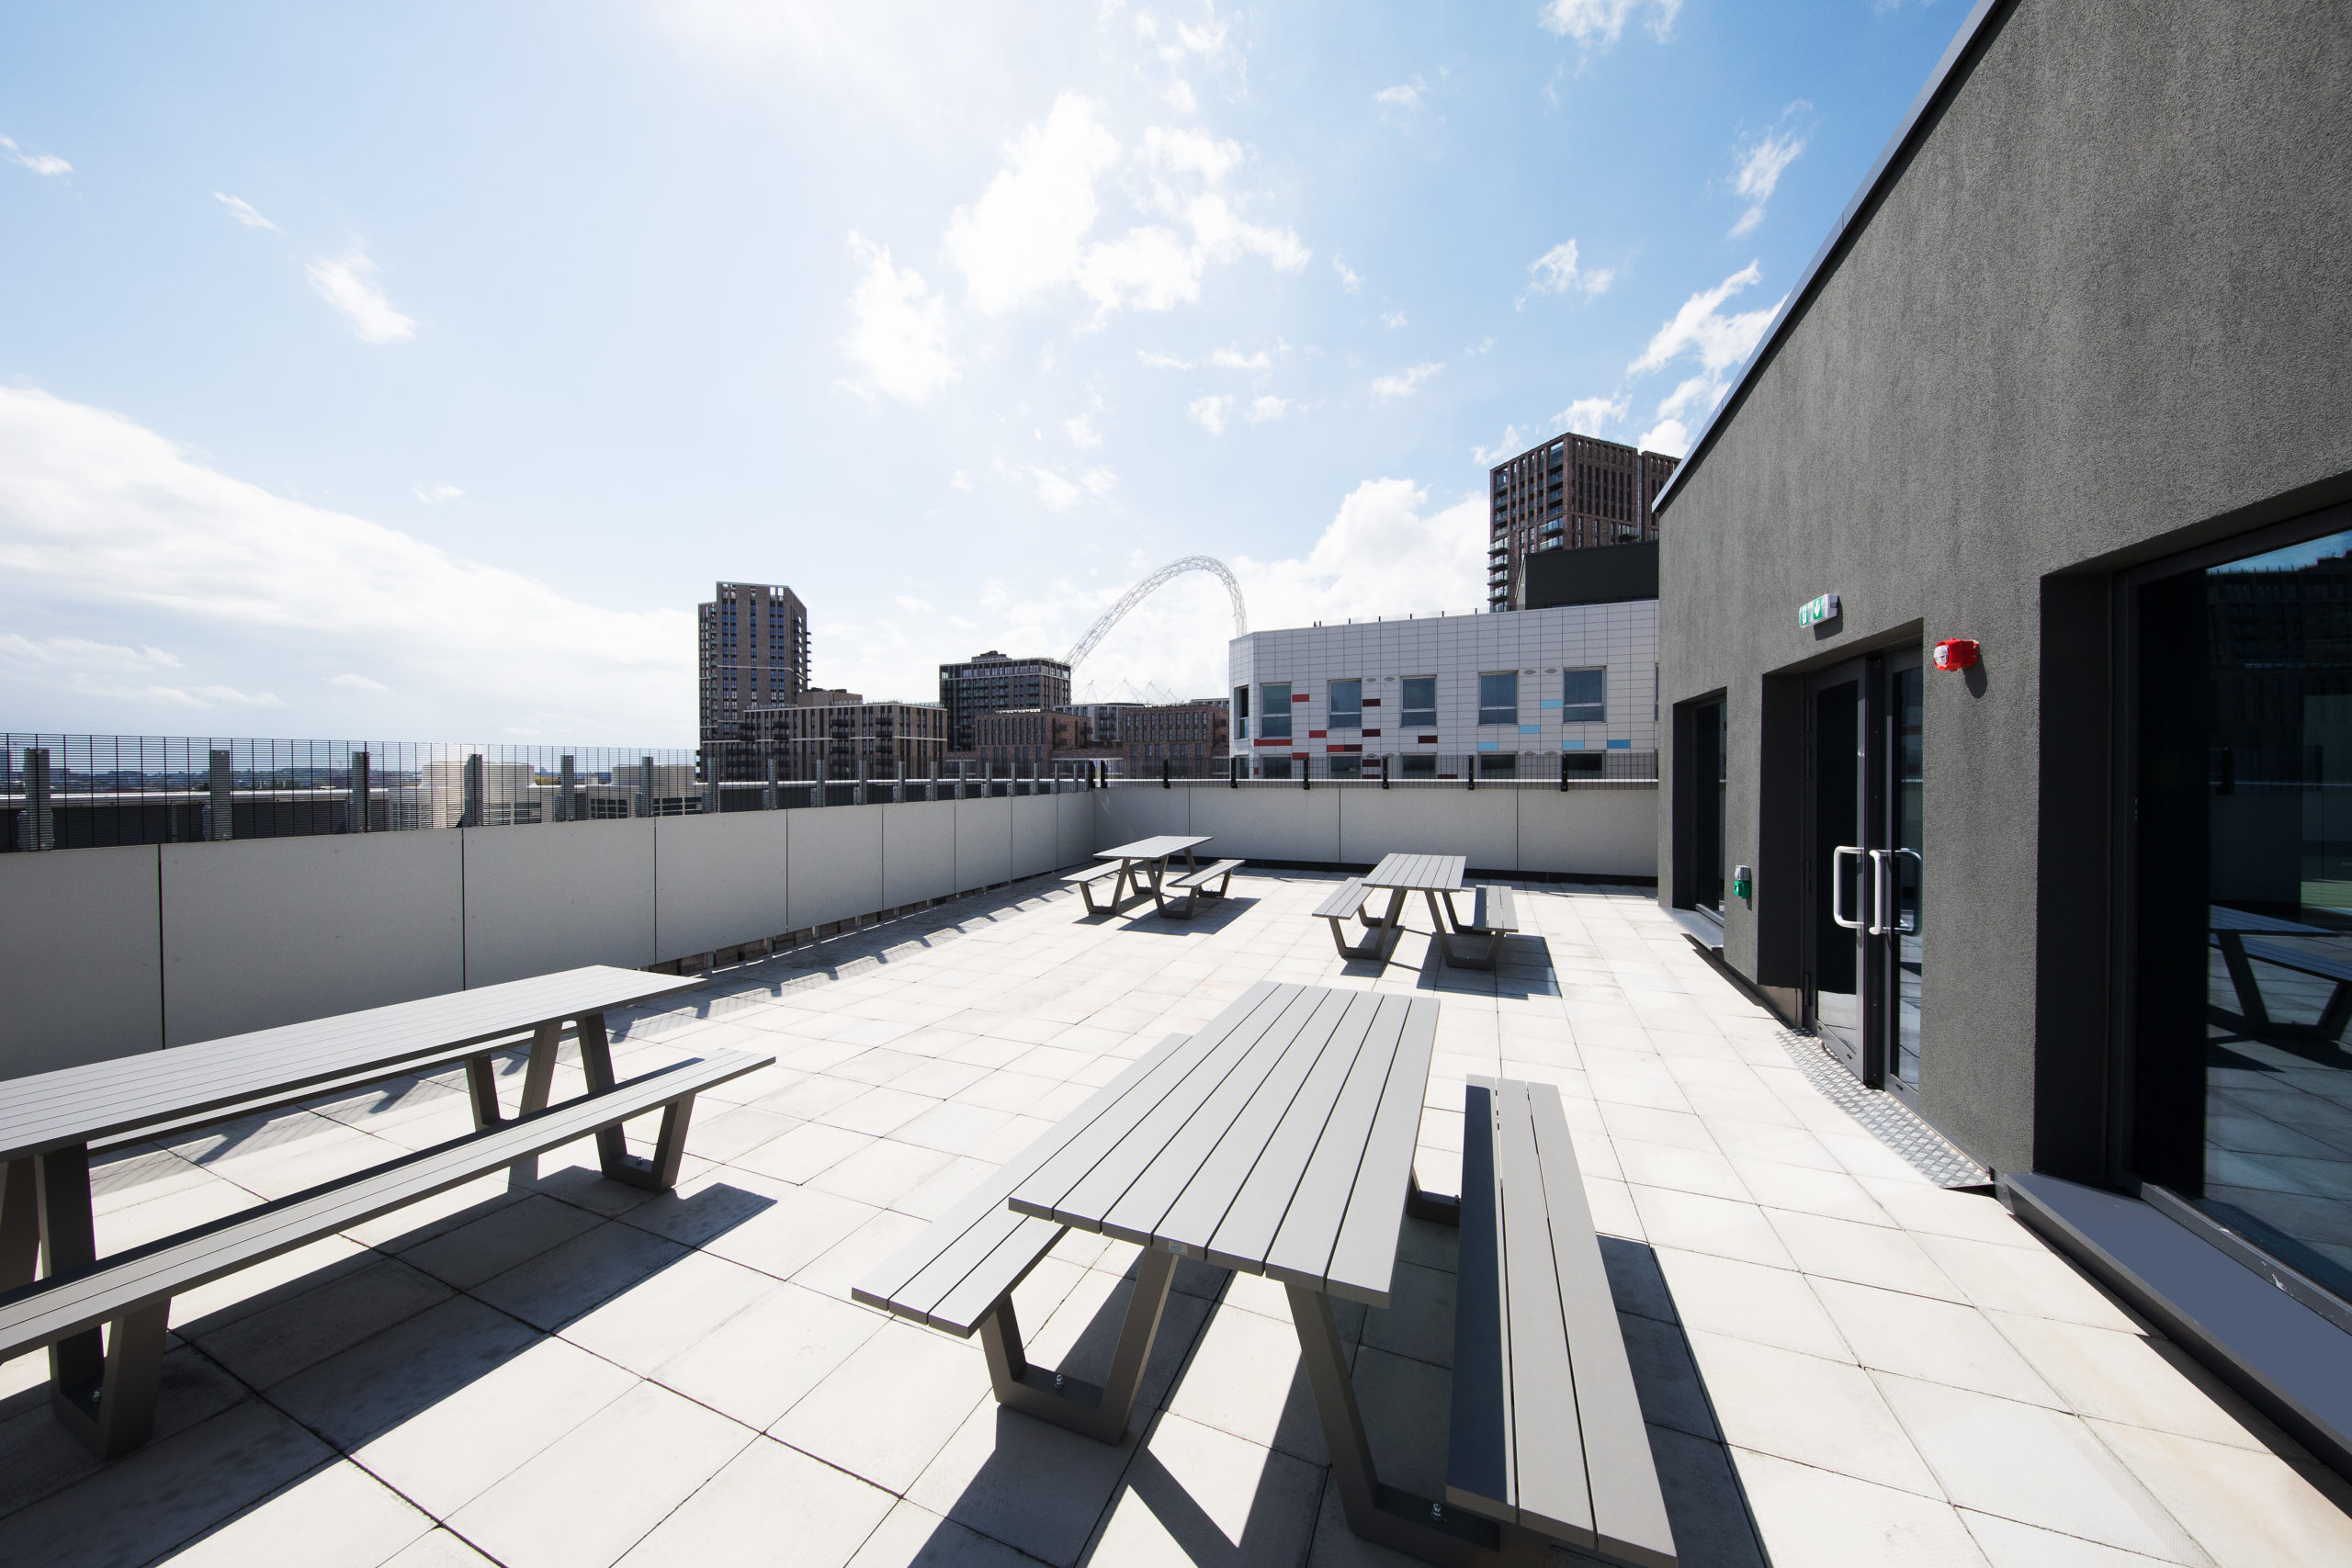 UCFB Roof terrace